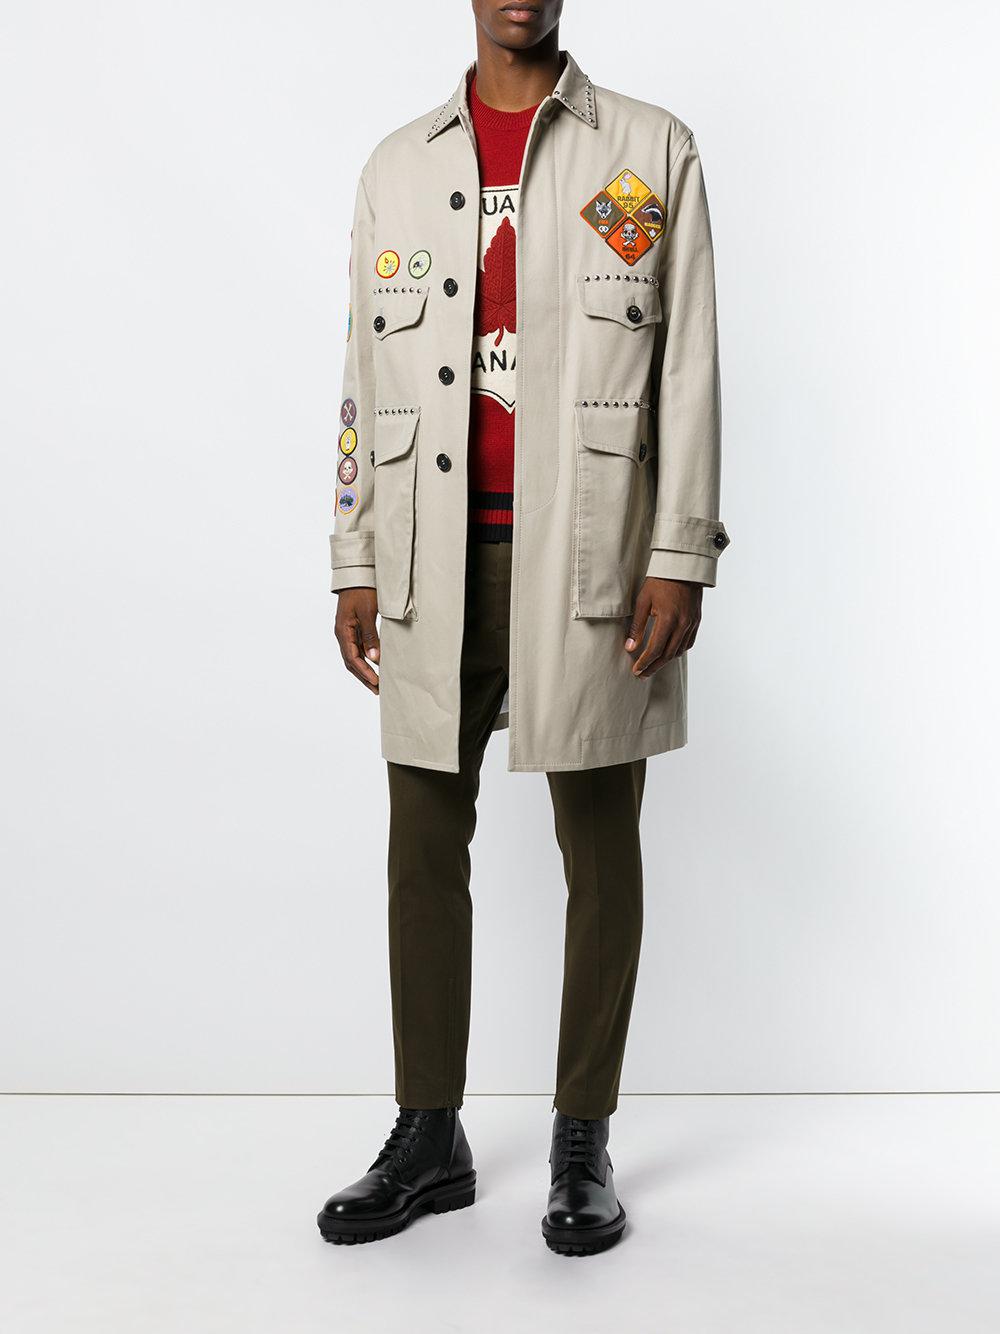 DSquared² Patch And Stud Trench Coat in Natural for Men | Lyst